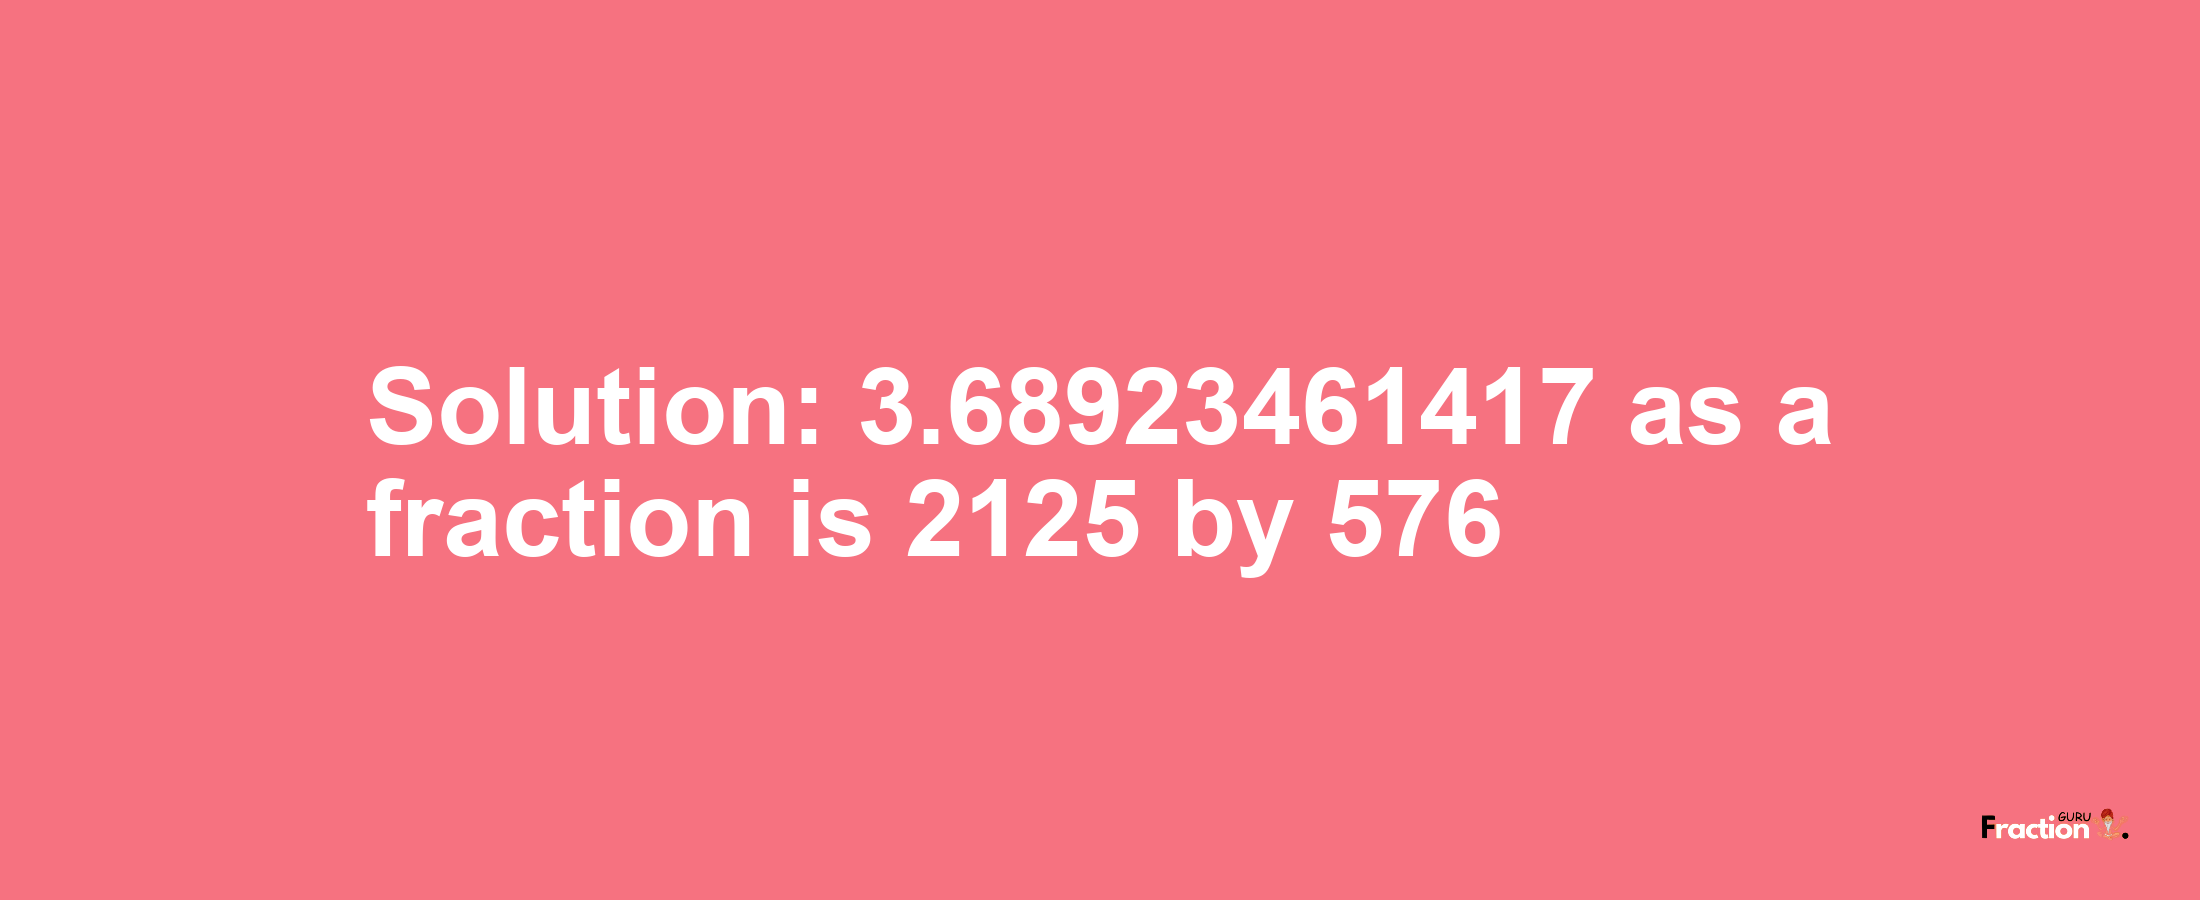 Solution:3.68923461417 as a fraction is 2125/576